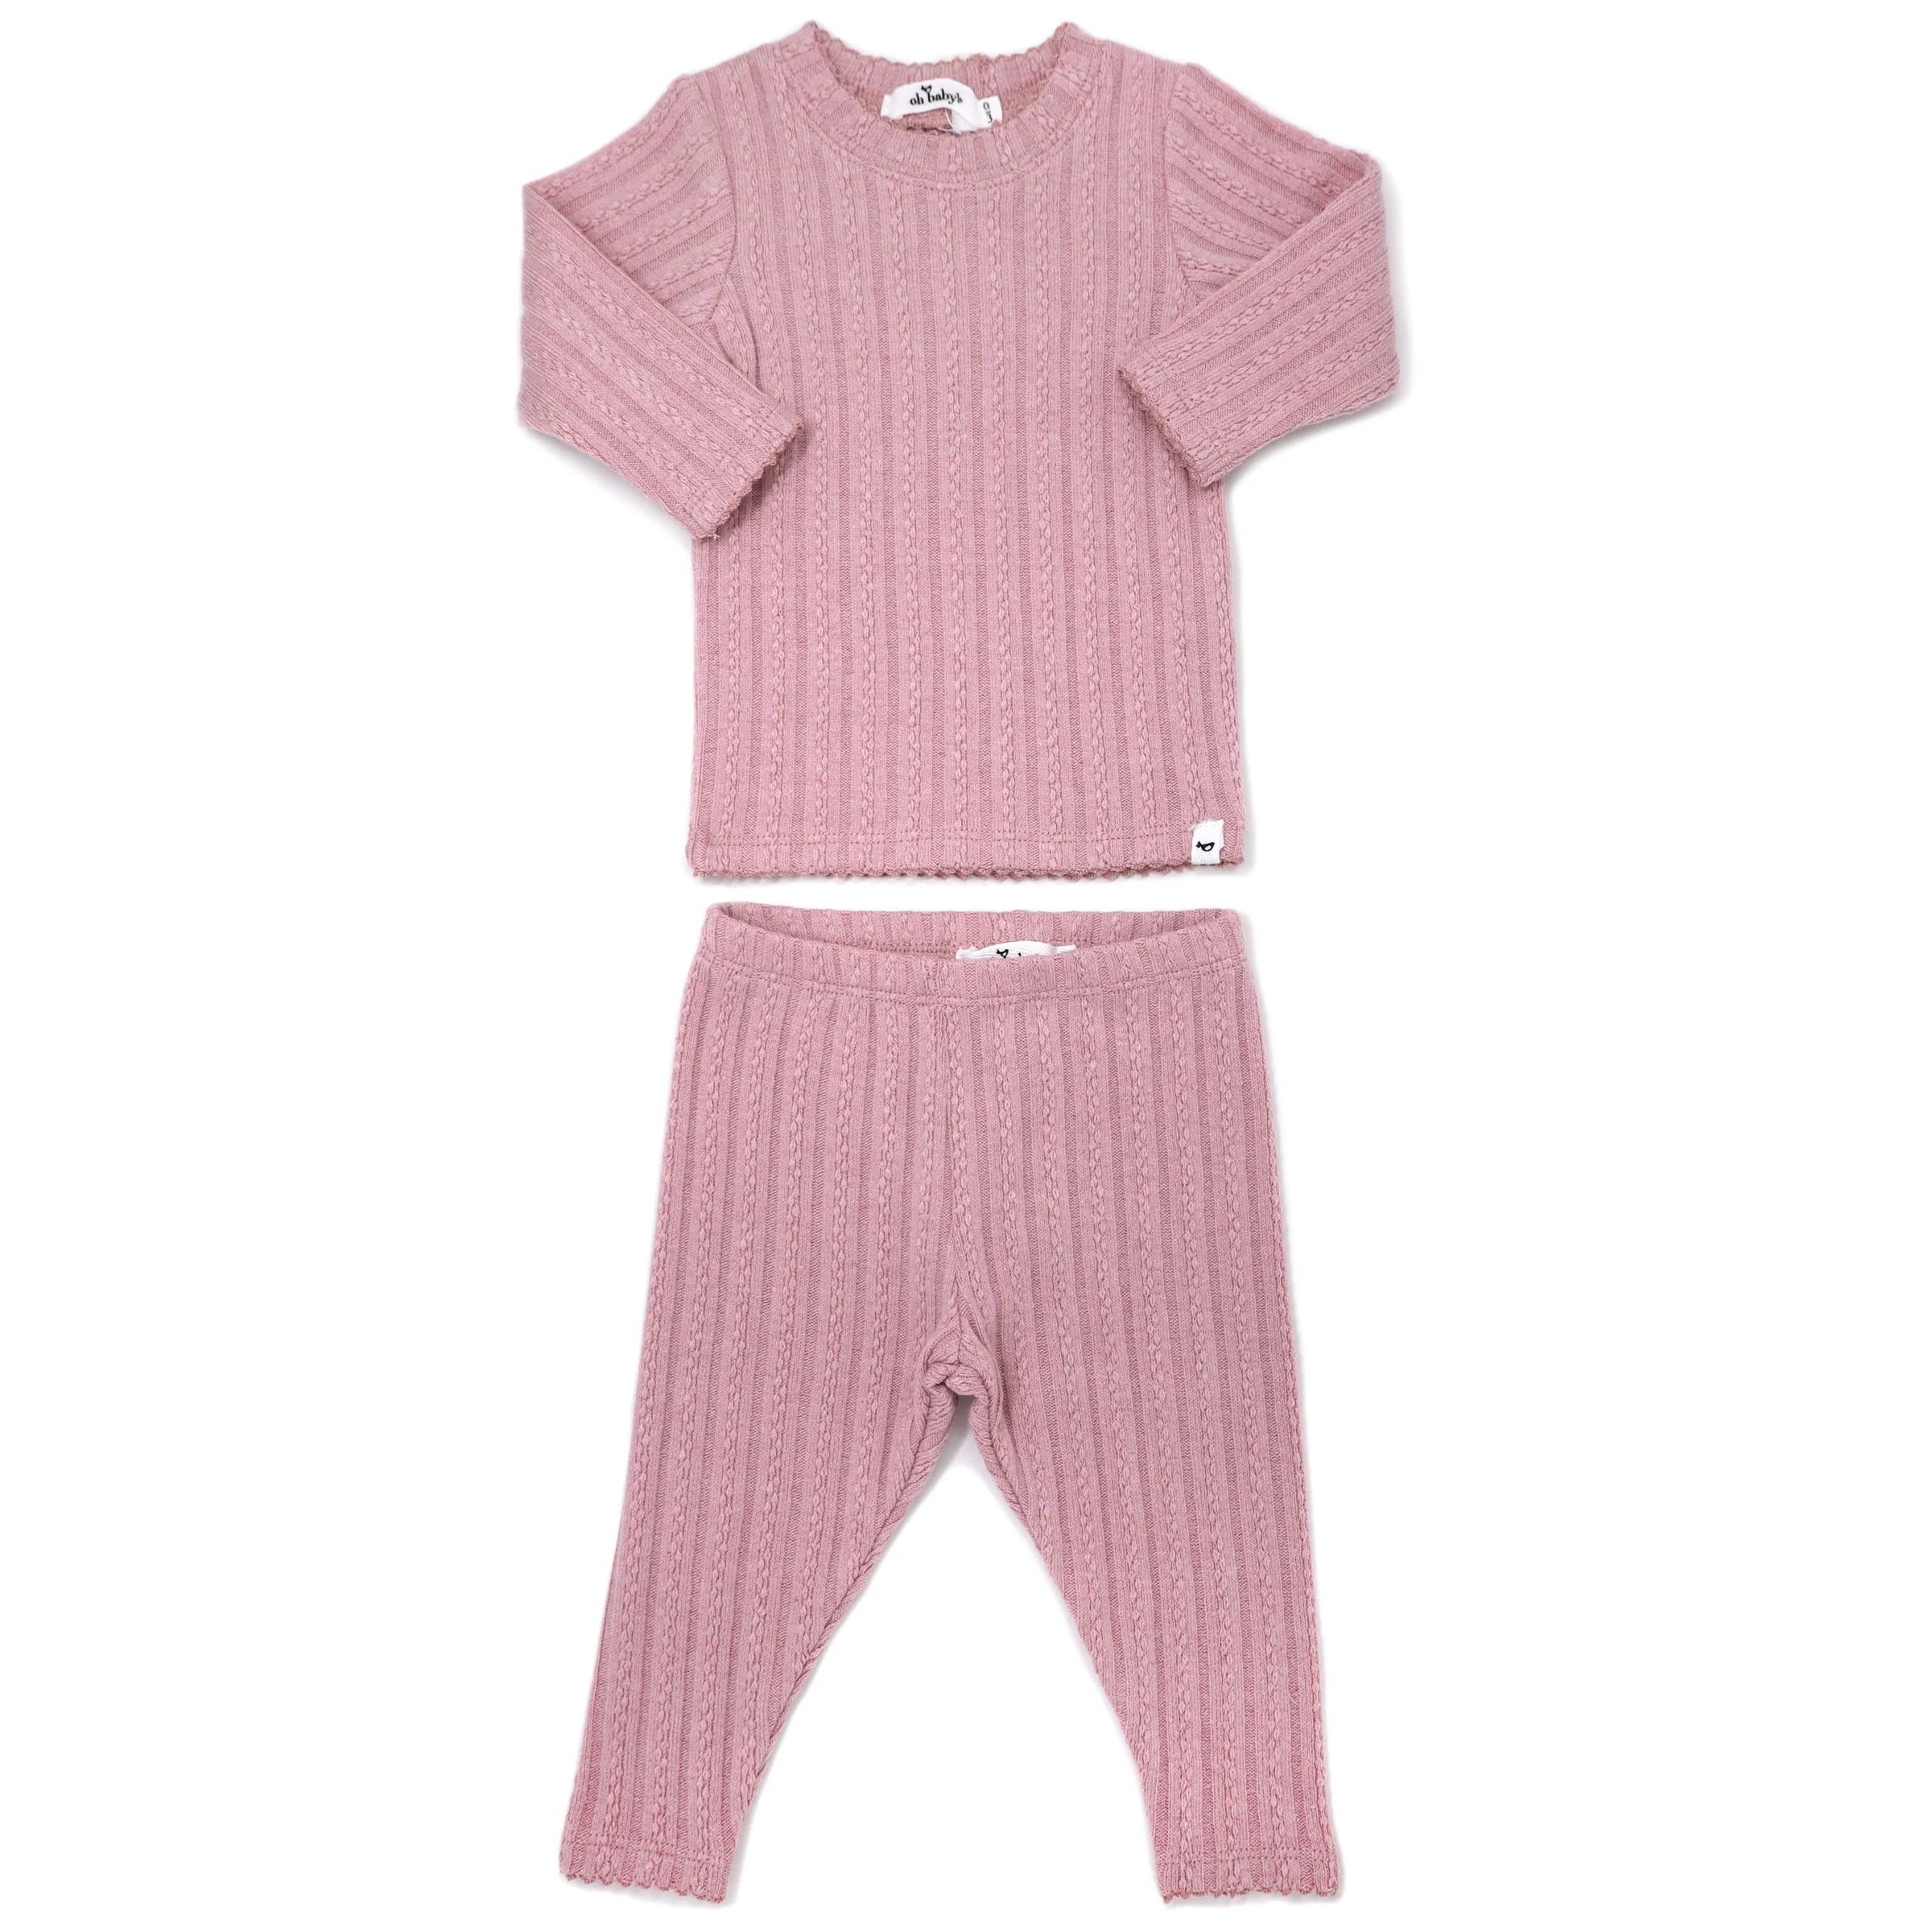 Two Piece Set - Lettuce Edge Cable Knit - Blush - Twinkle Twinkle Little One